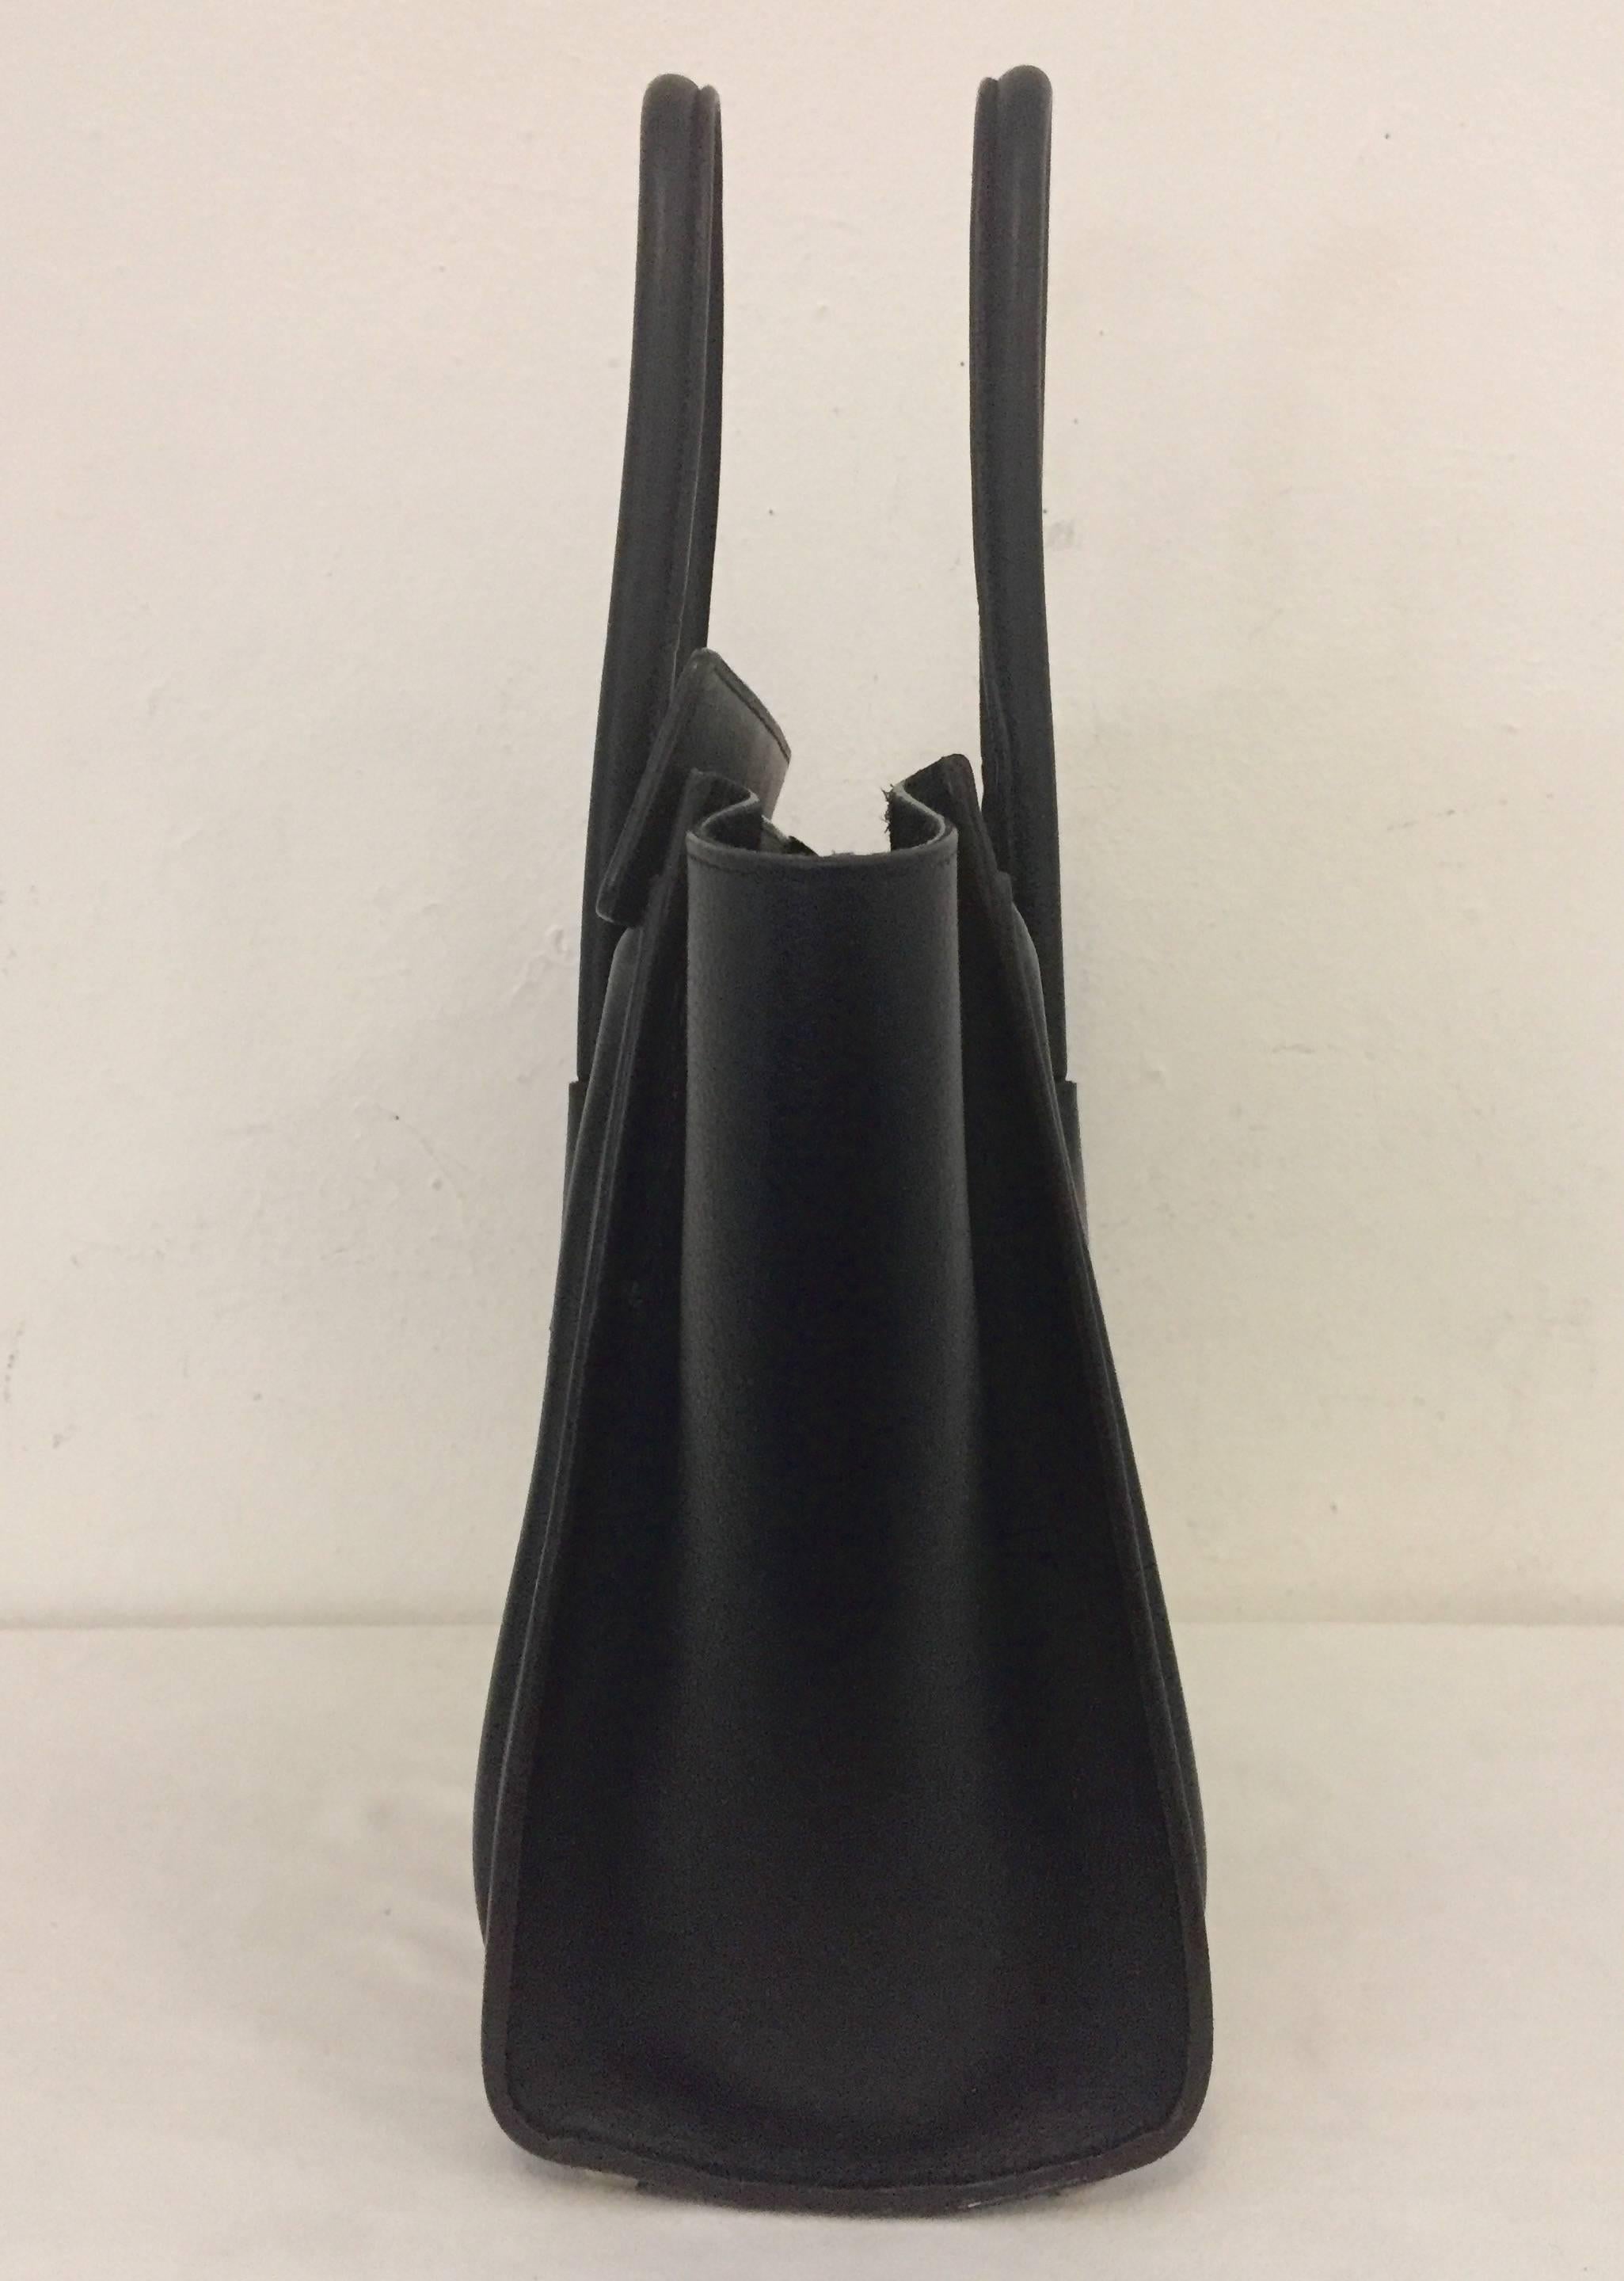 Celine Chic and minimalistic Black handbag with top zipper closing and 2 handles with Drop of 5.5 inches.  Black inside with side zippered slot for additional security of your essentials and on the front of the bag there is also another small